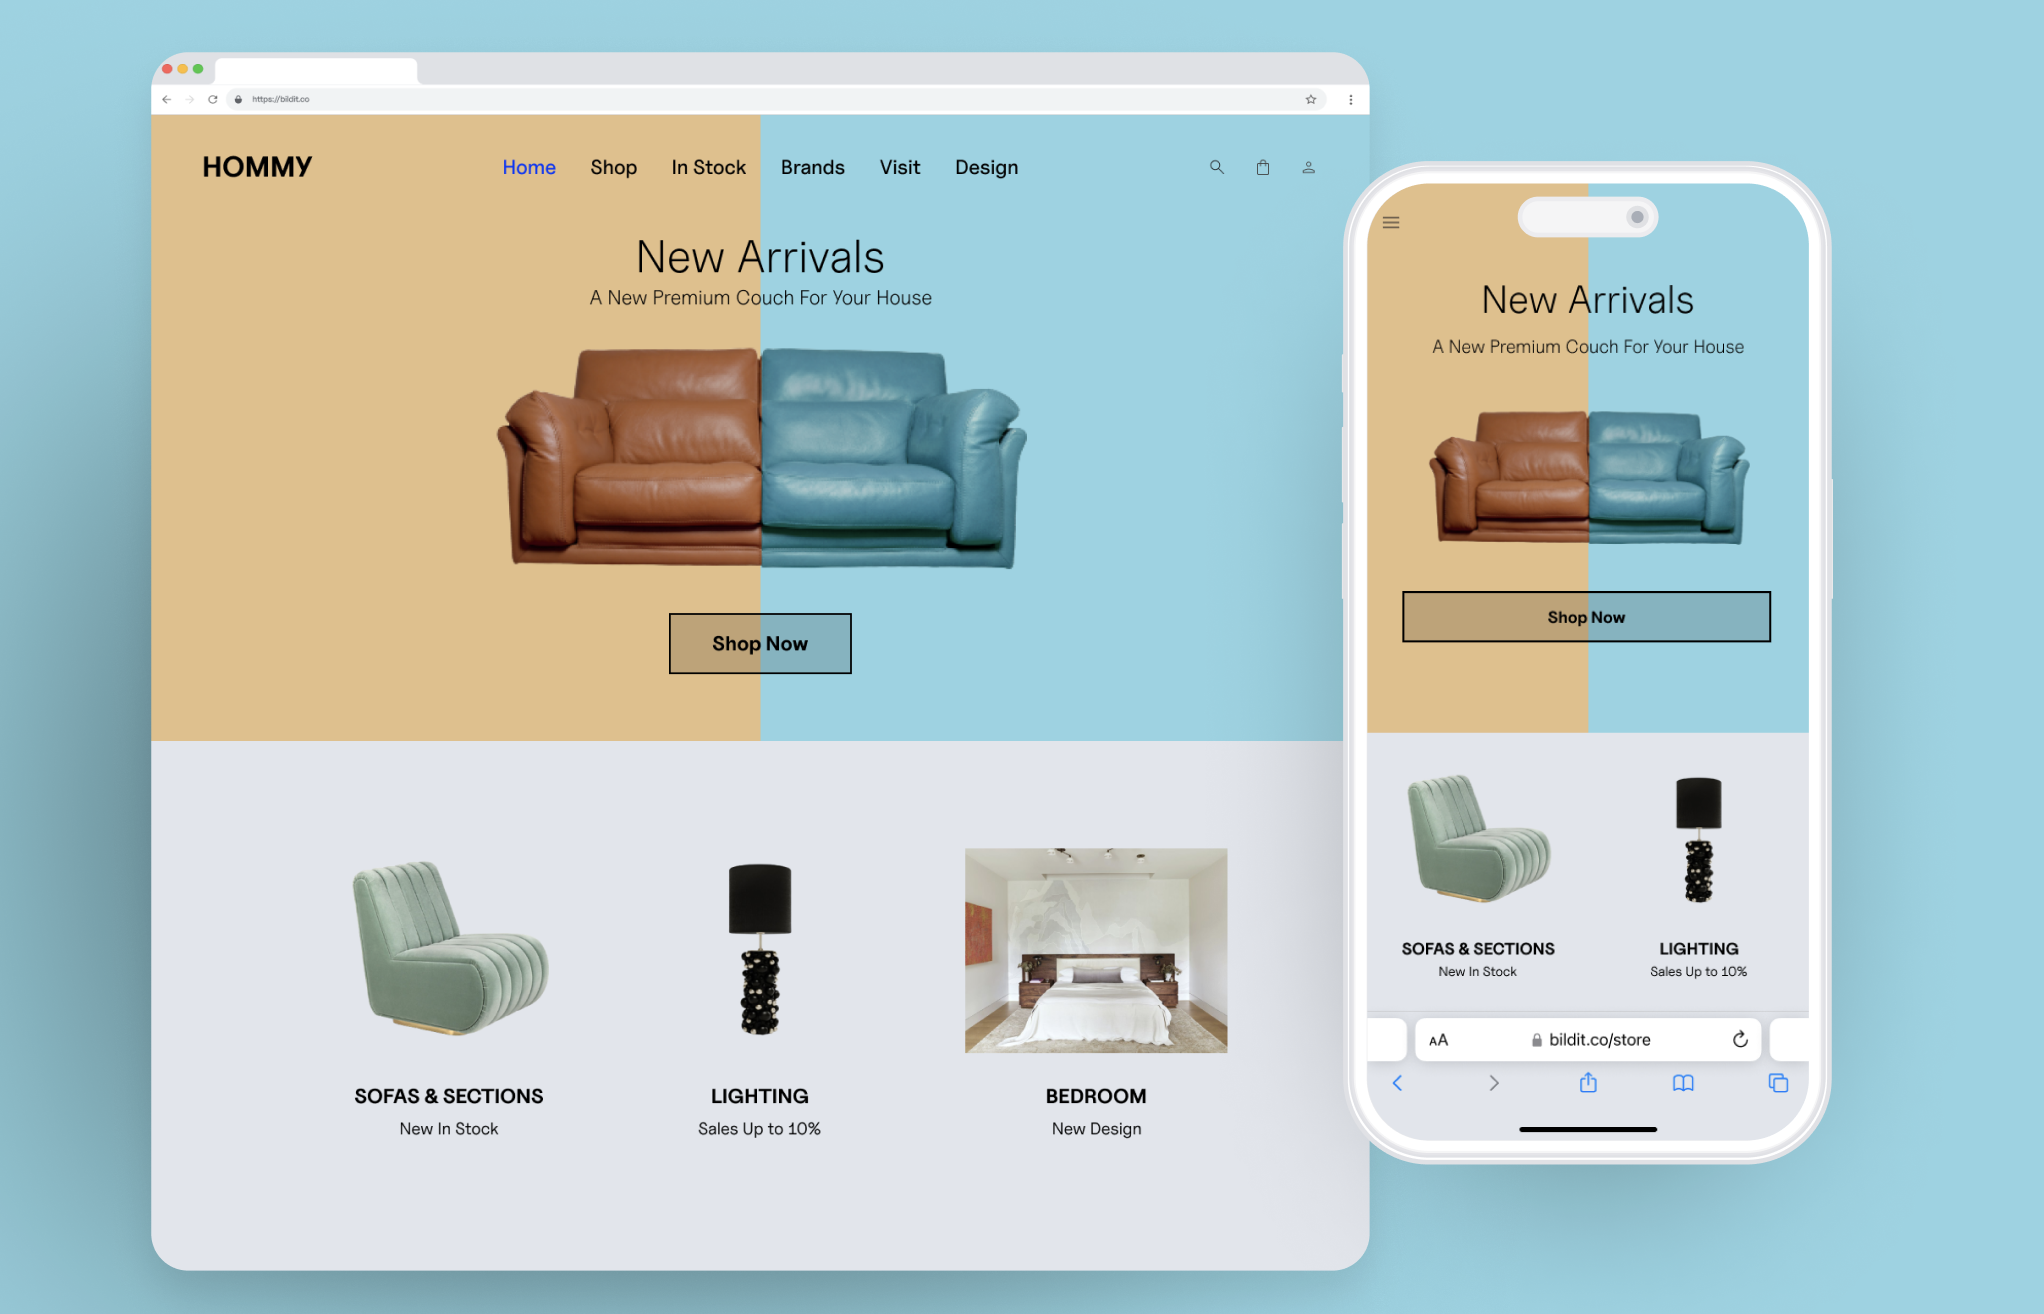 The image displays two views of a furniture retail website named 